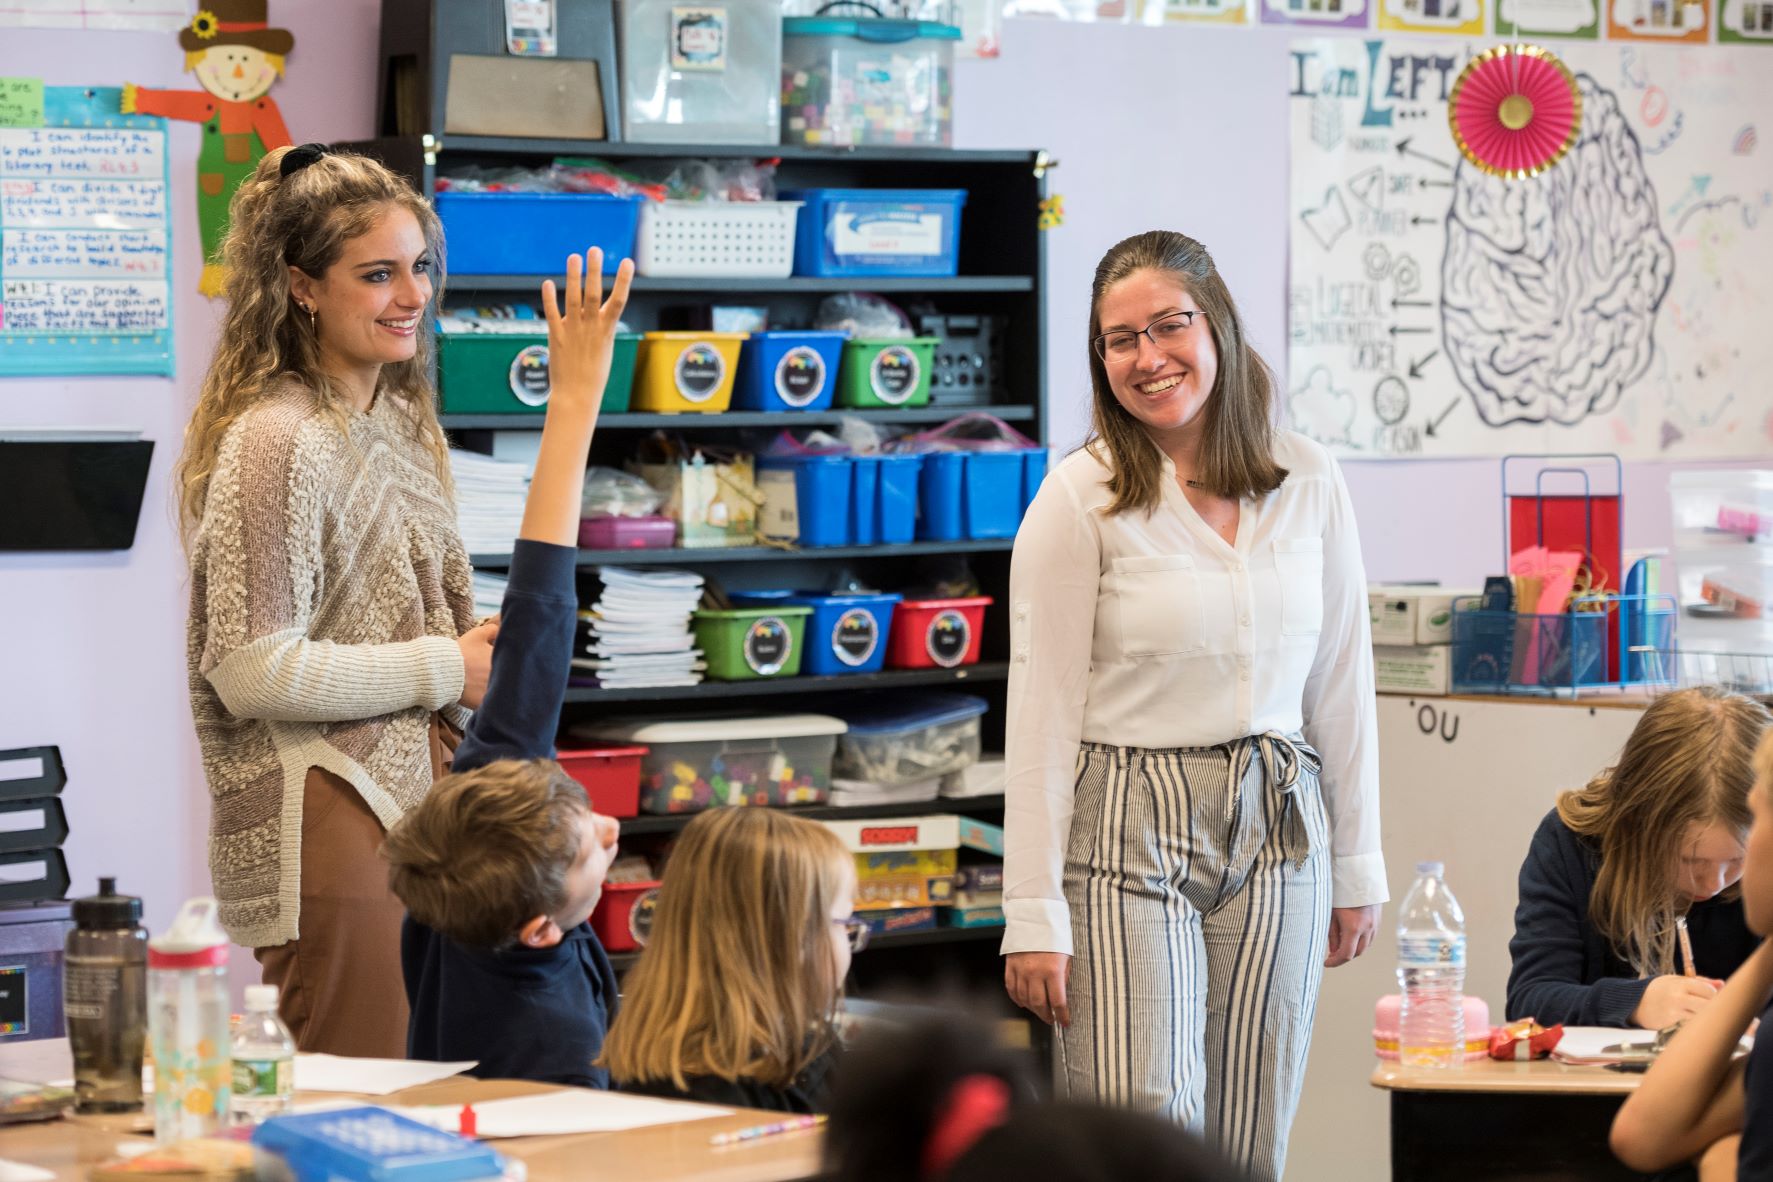 Students in CEHD’s elementary teacher education program assist a fourth grade teacher at Providence Creek Academy Charter School, applying lessons from their teacher preparation program in a real-world setting.